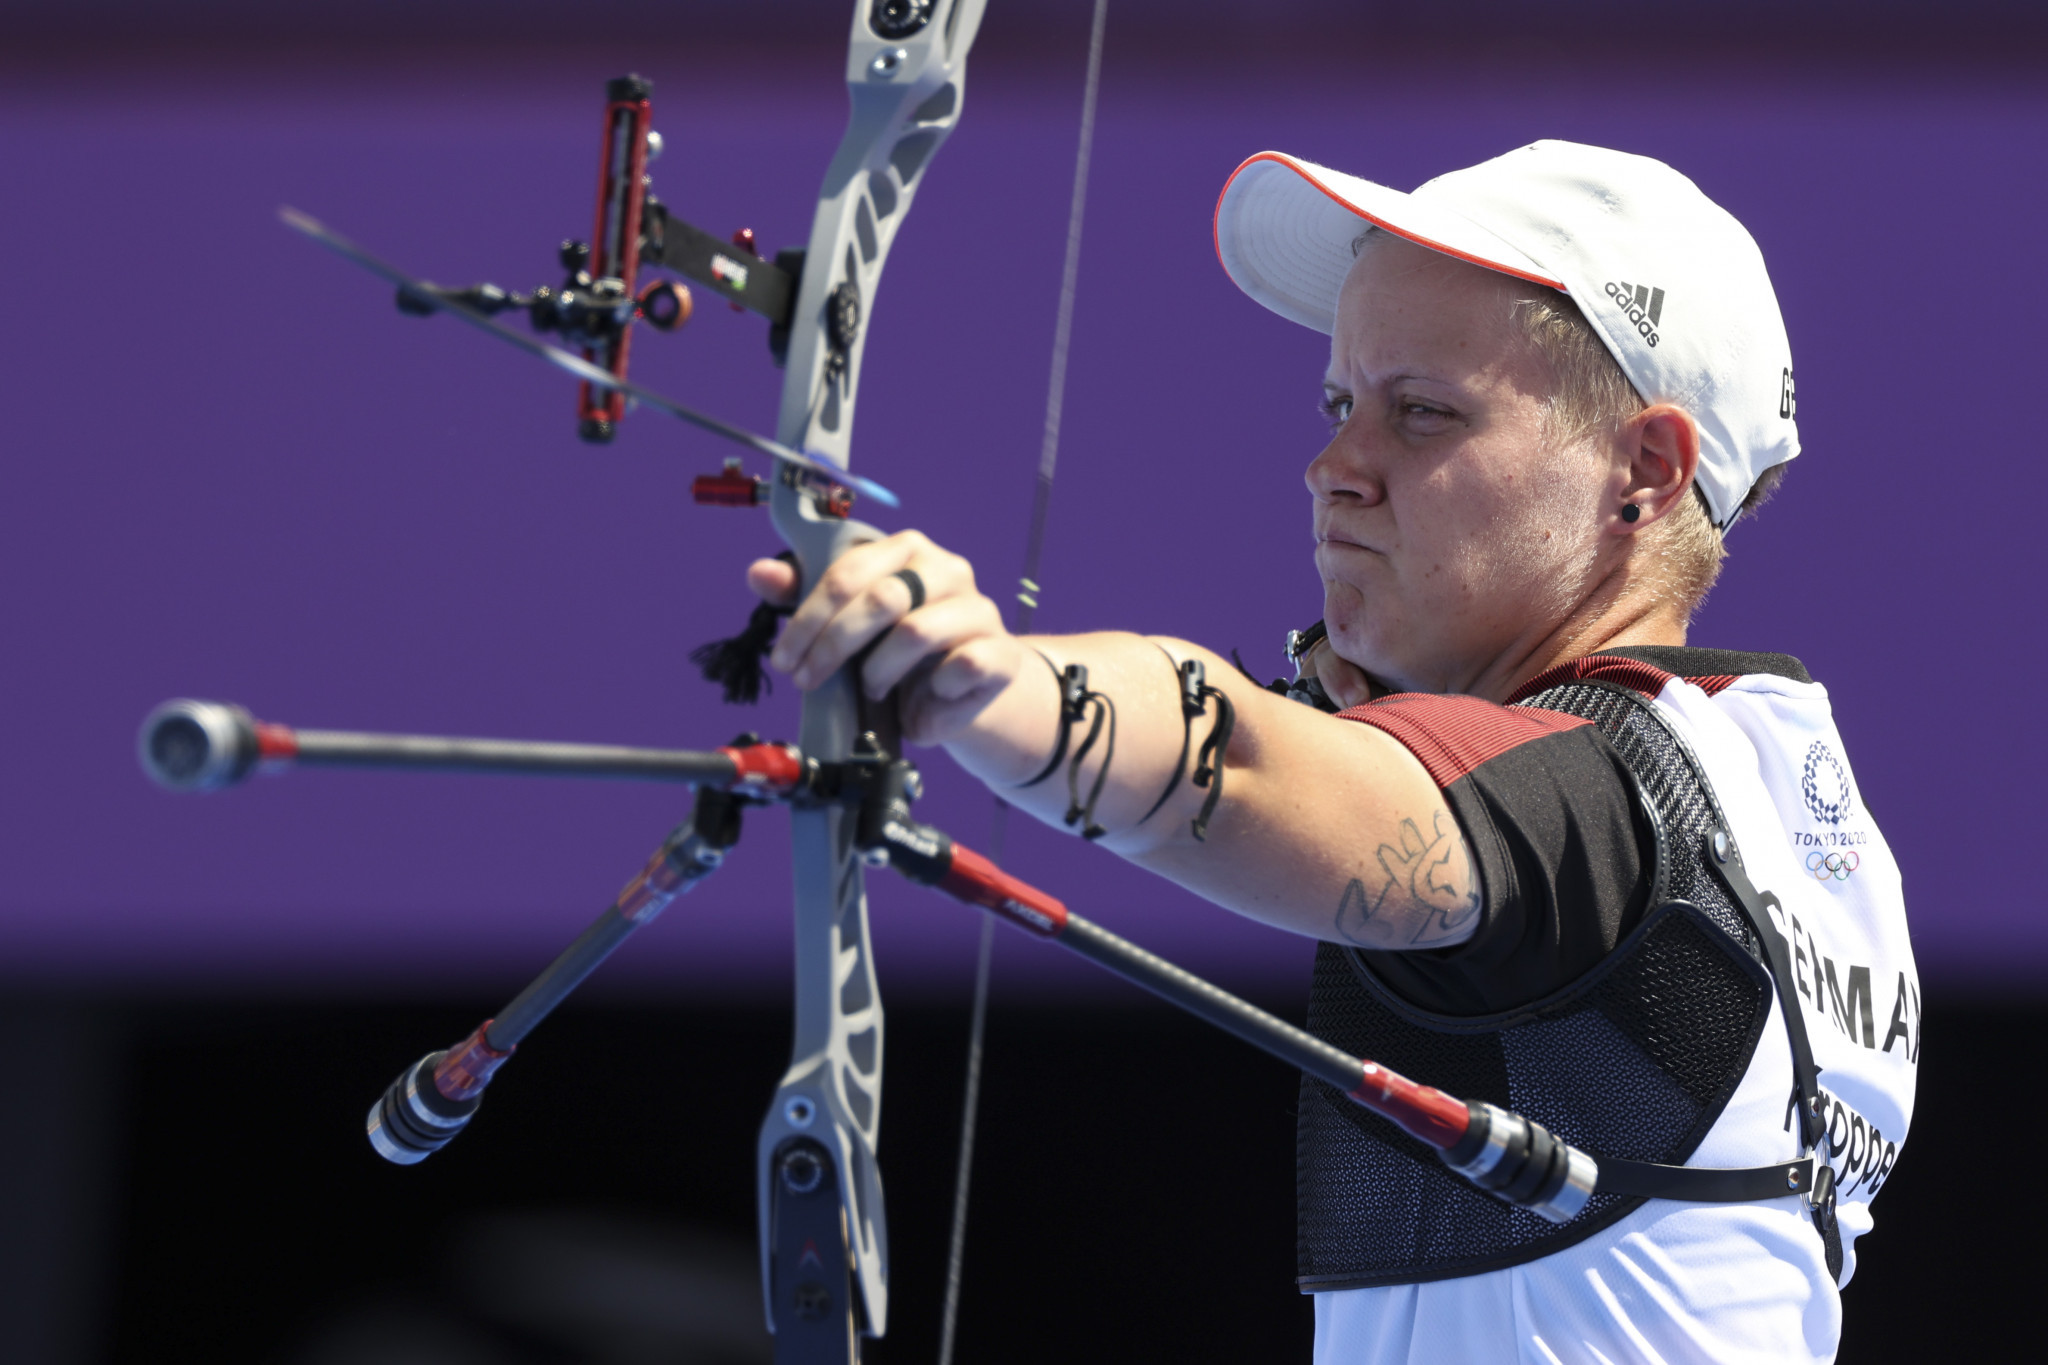 Michelle Kroppen was the top women's recurve archer today in Munich ©Getty Images